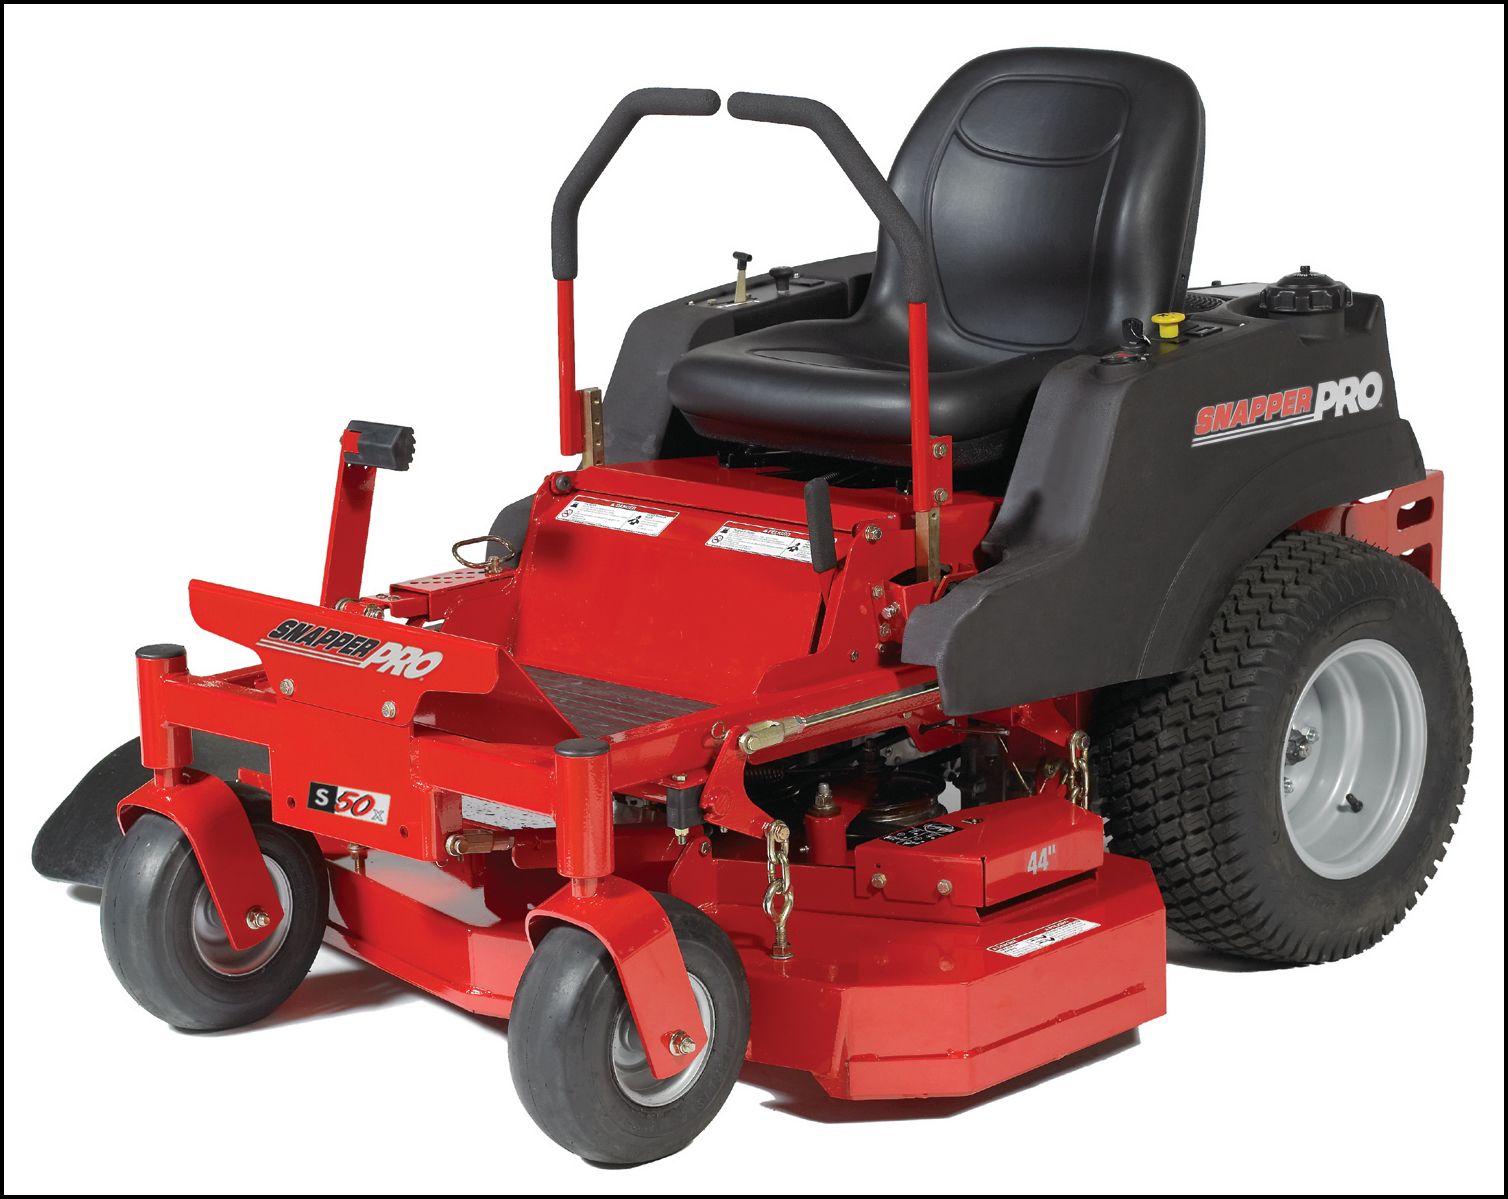 Commercial Lawn Mower Reviews